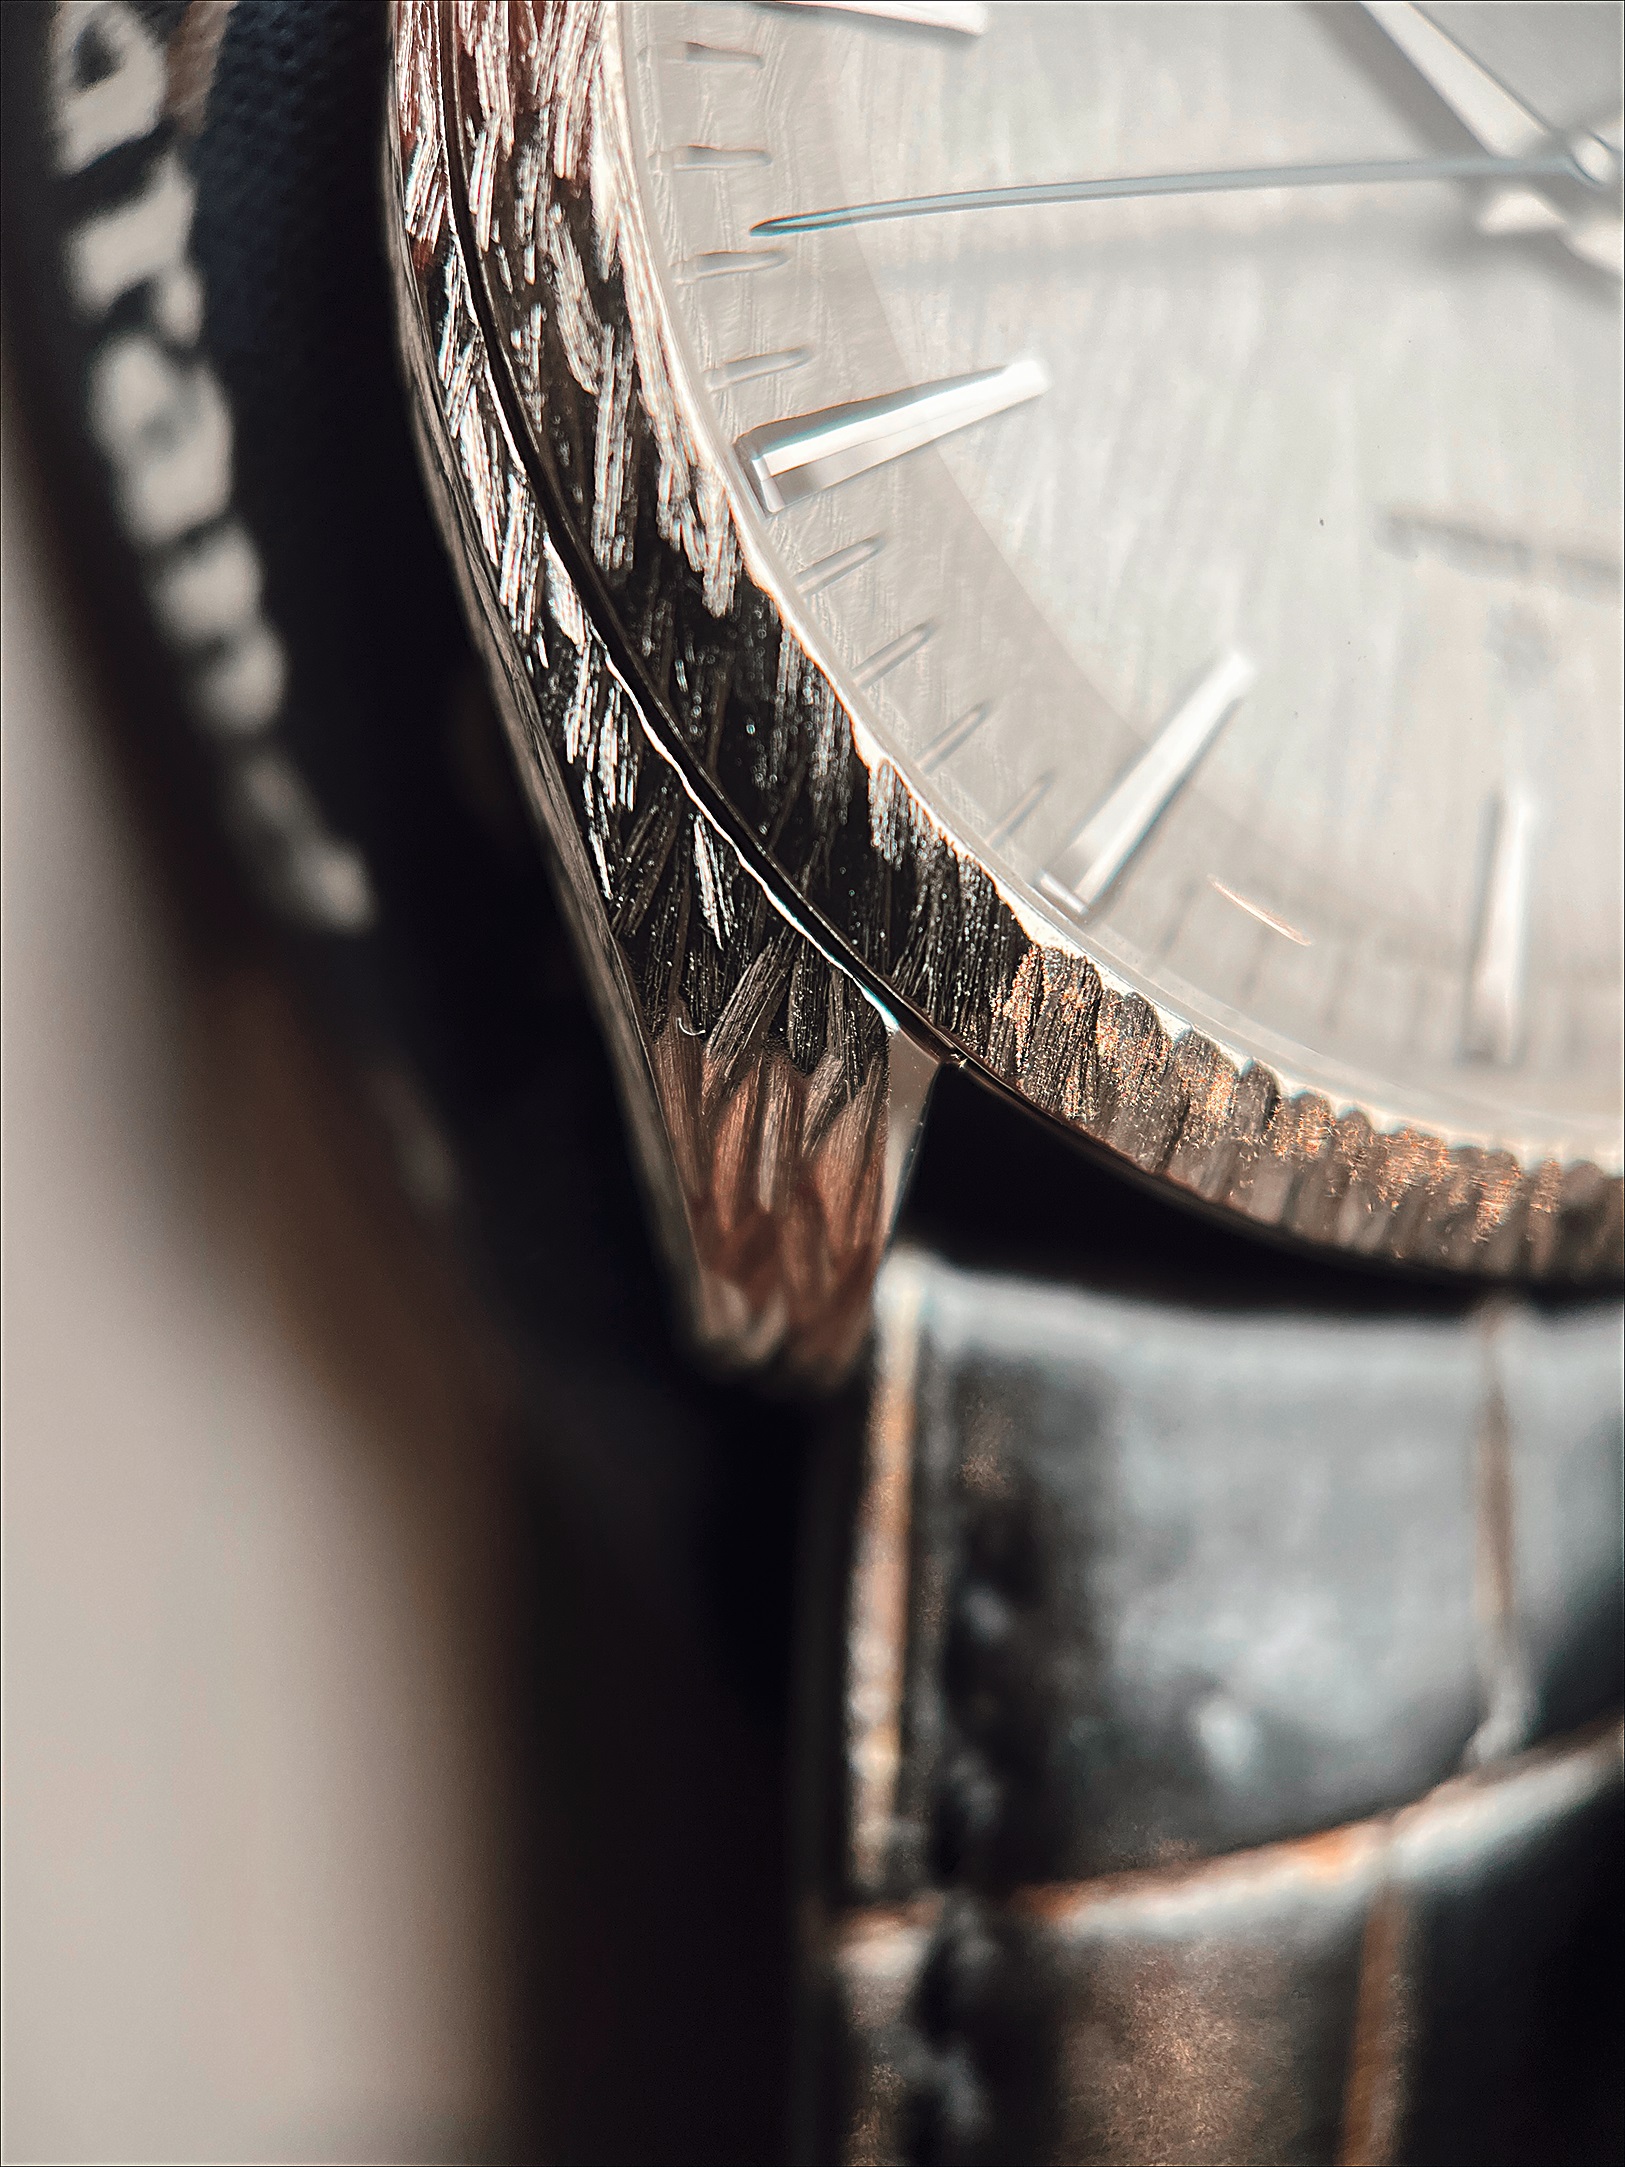 A closer look at the hand engraved Grand Seiko shows the work done separately on the case, bezel, and dial that all must flow properly together when assembled.